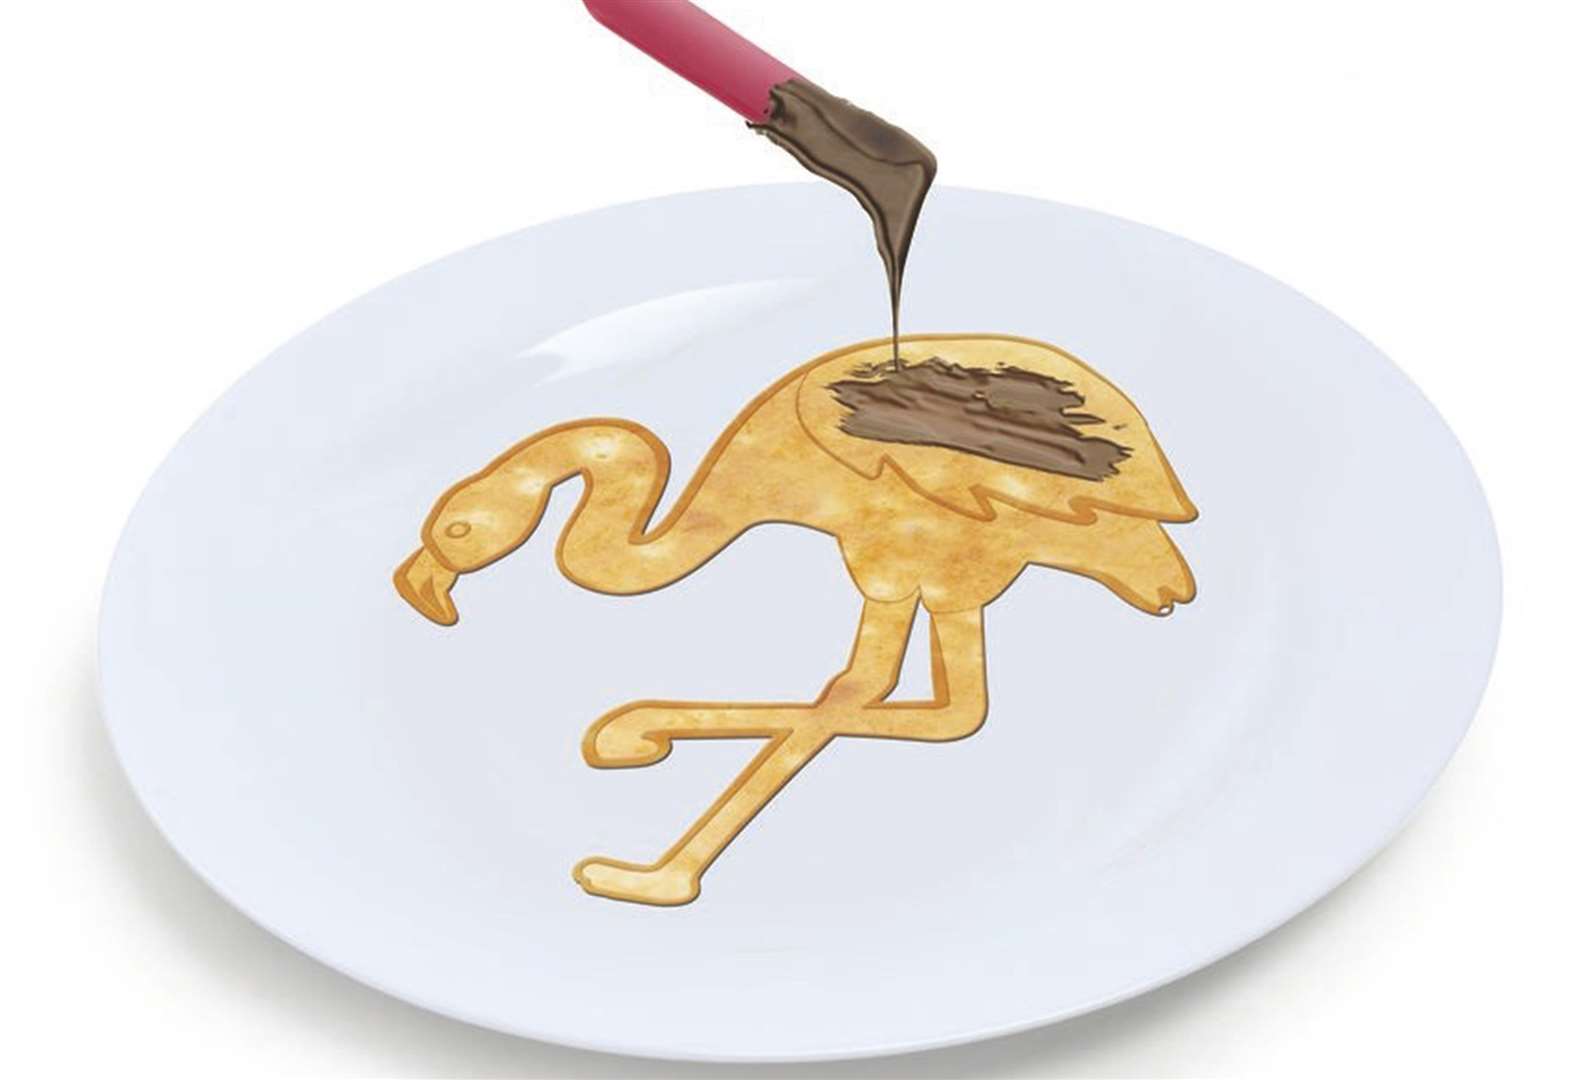 Flamingo pancake anyone? A JD Williams pan with flamingo outline is available for £16.